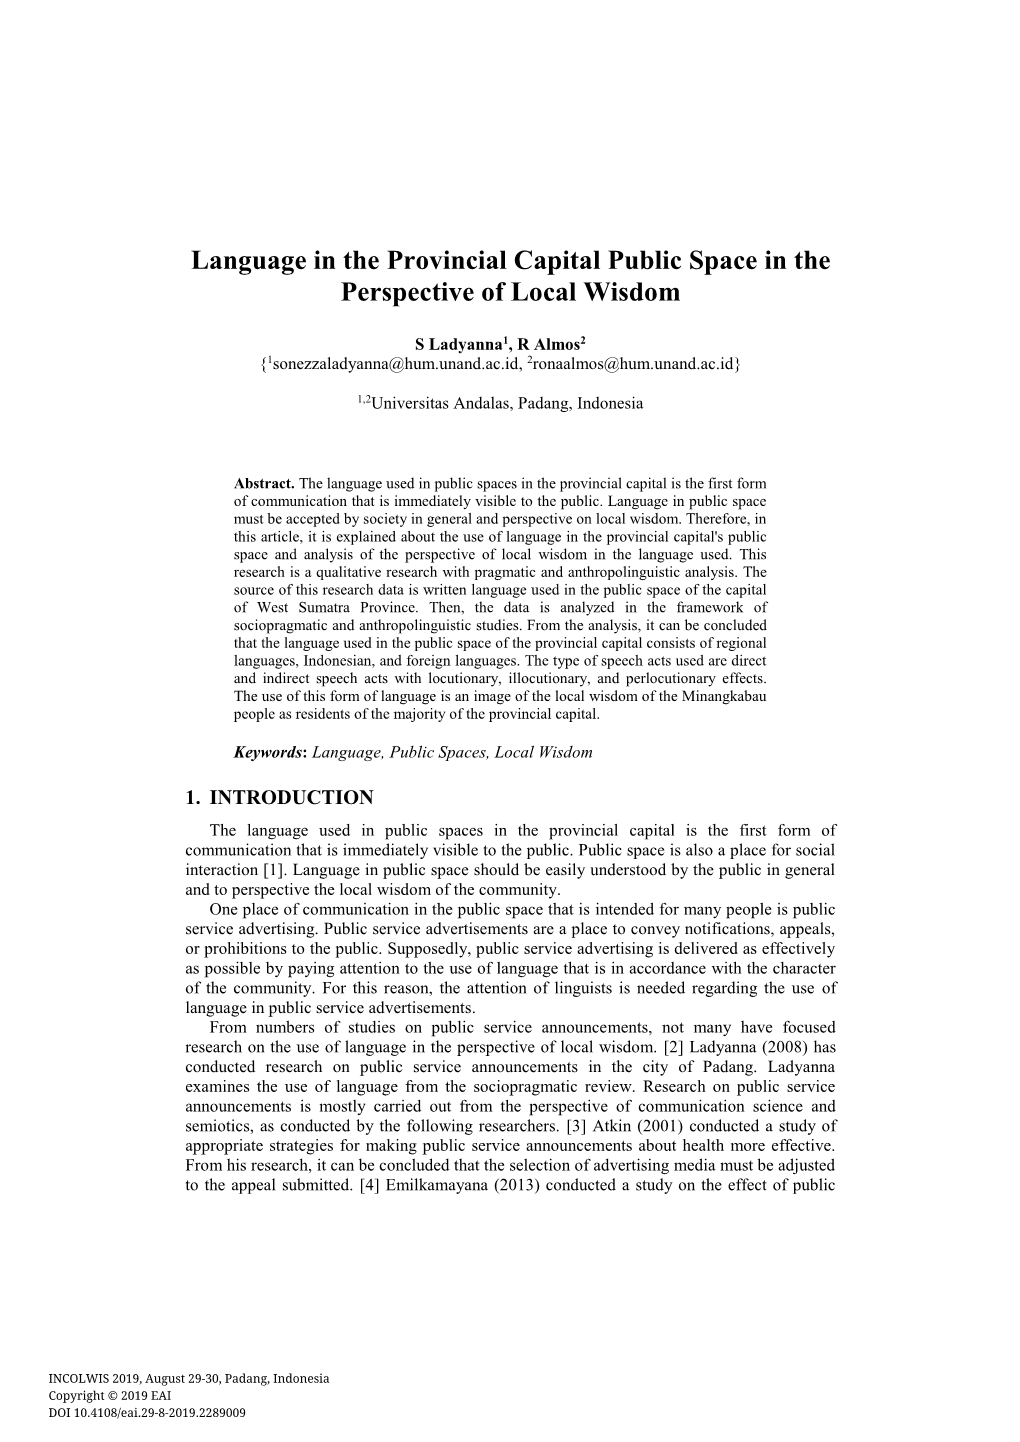 Language in the Provincial Capital Public Space in the Perspective of Local Wisdom